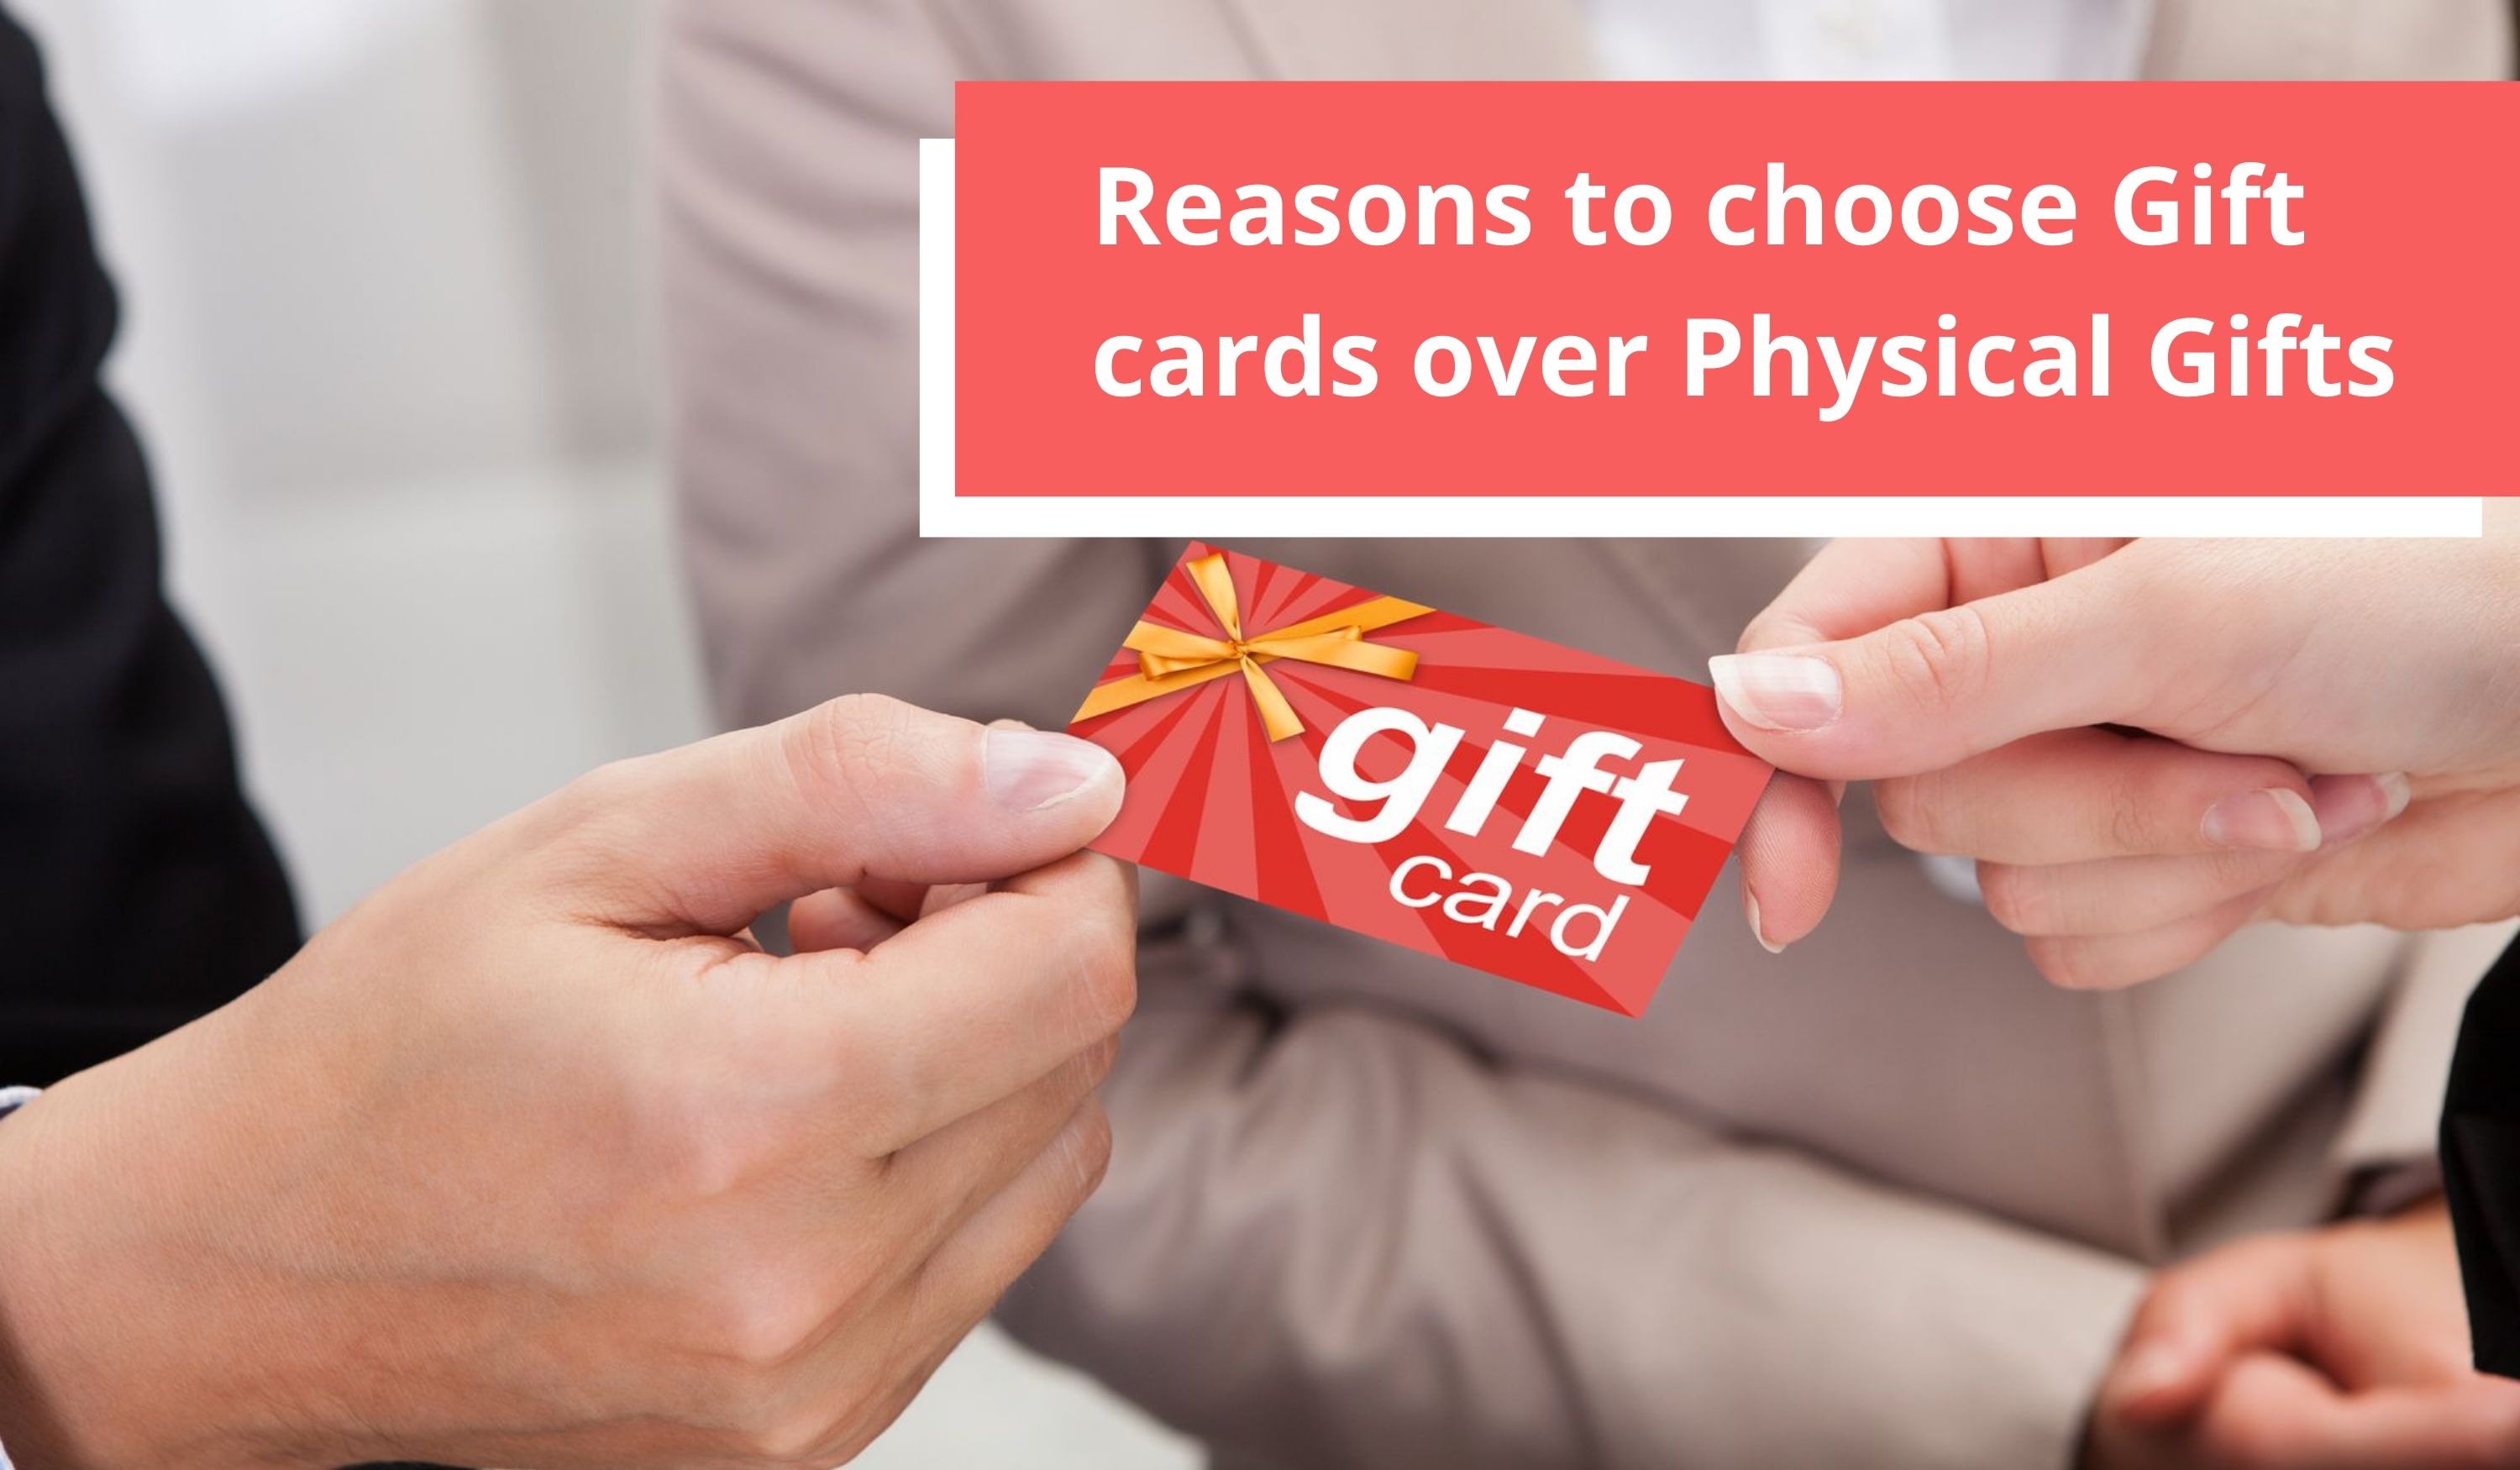 Reasons to choose Gift cards over Physical Gifts